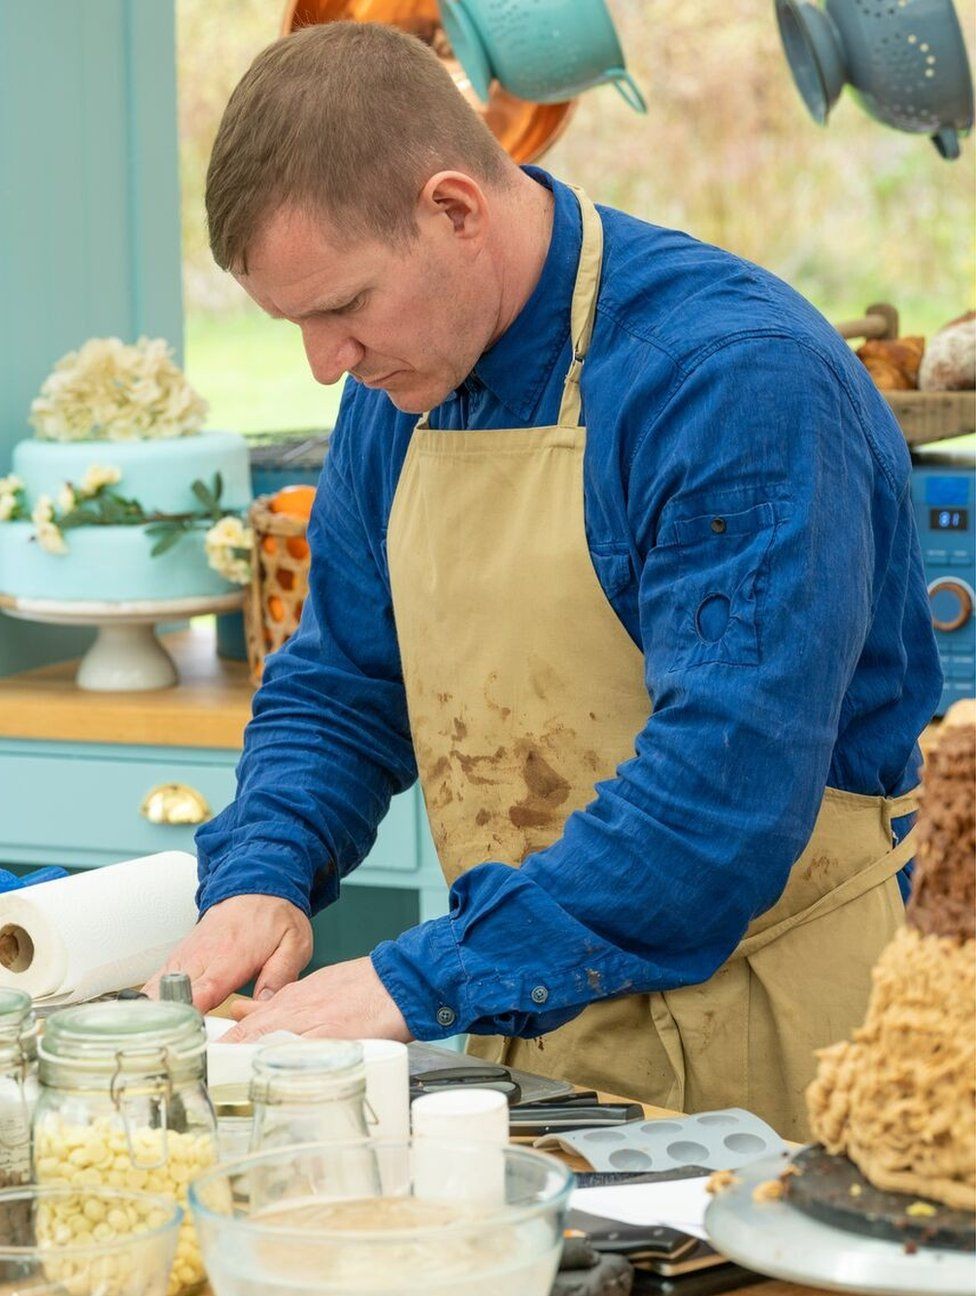 New Bake Off contestant Dan in action